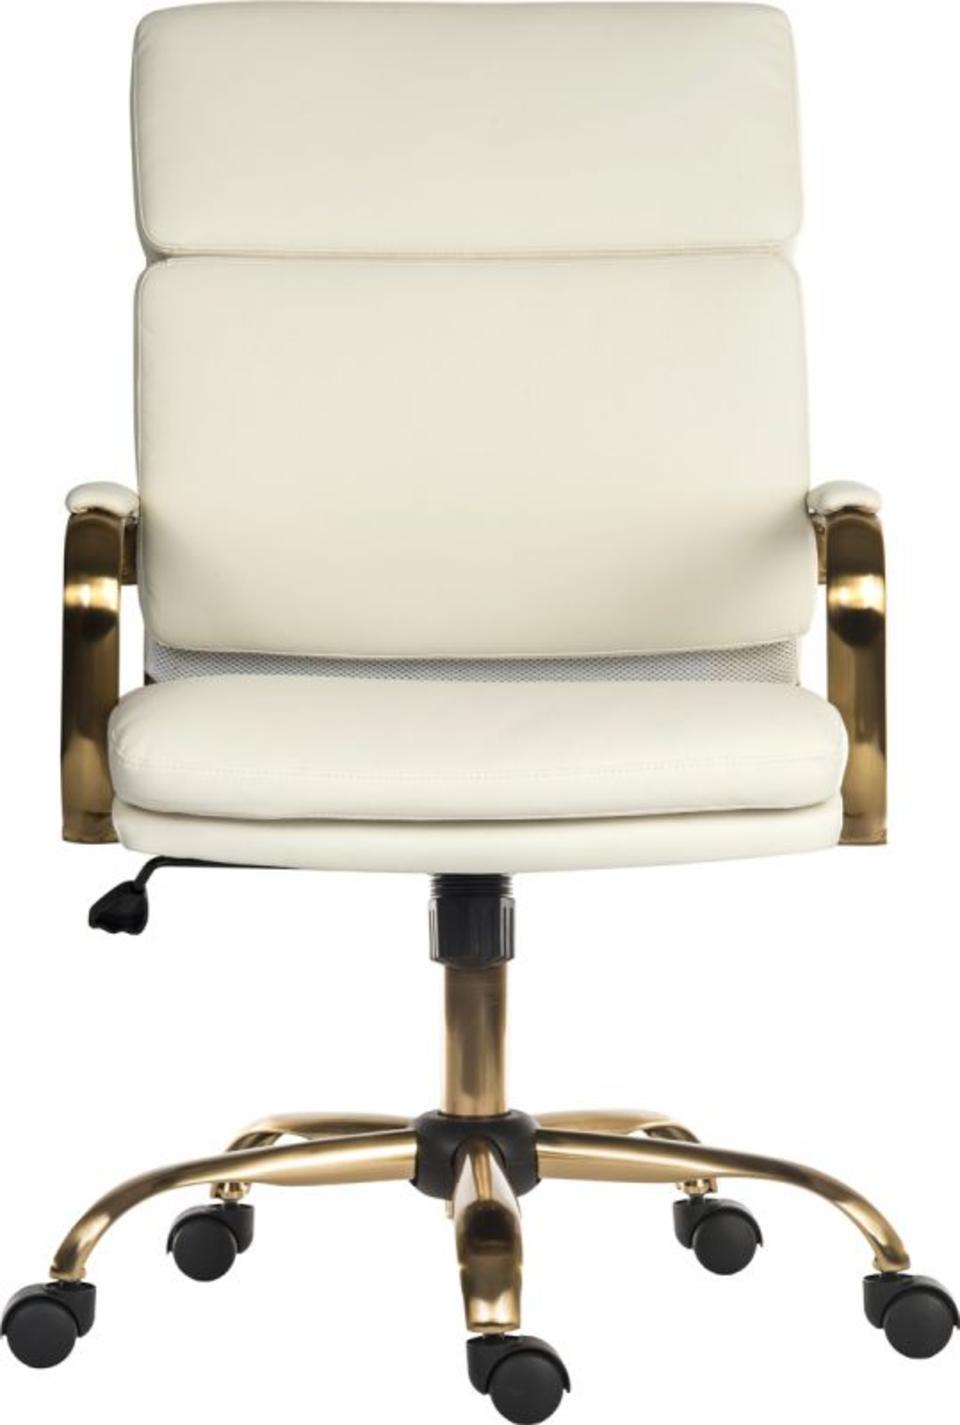 Vintage Executive Chair White Faux Leather